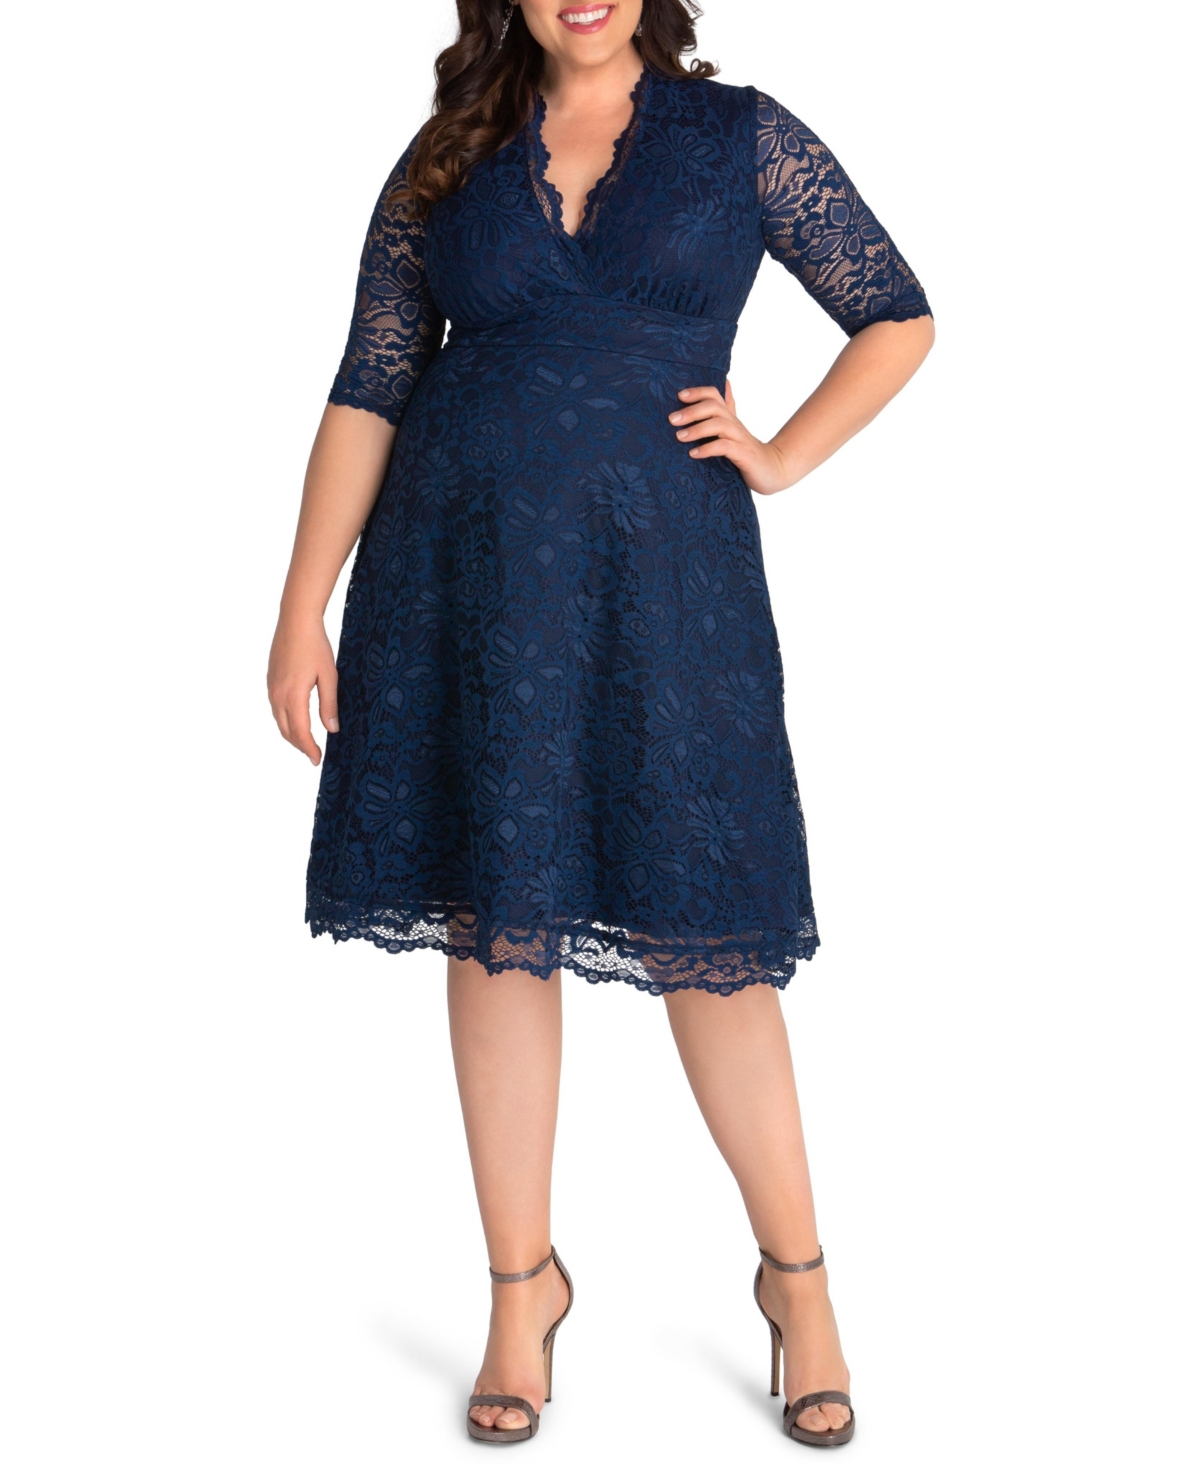 KIYONNA WOMEN'S PLUS SIZE MADEMOISELLE LACE COCKTAIL DRESS WITH SLEEVES